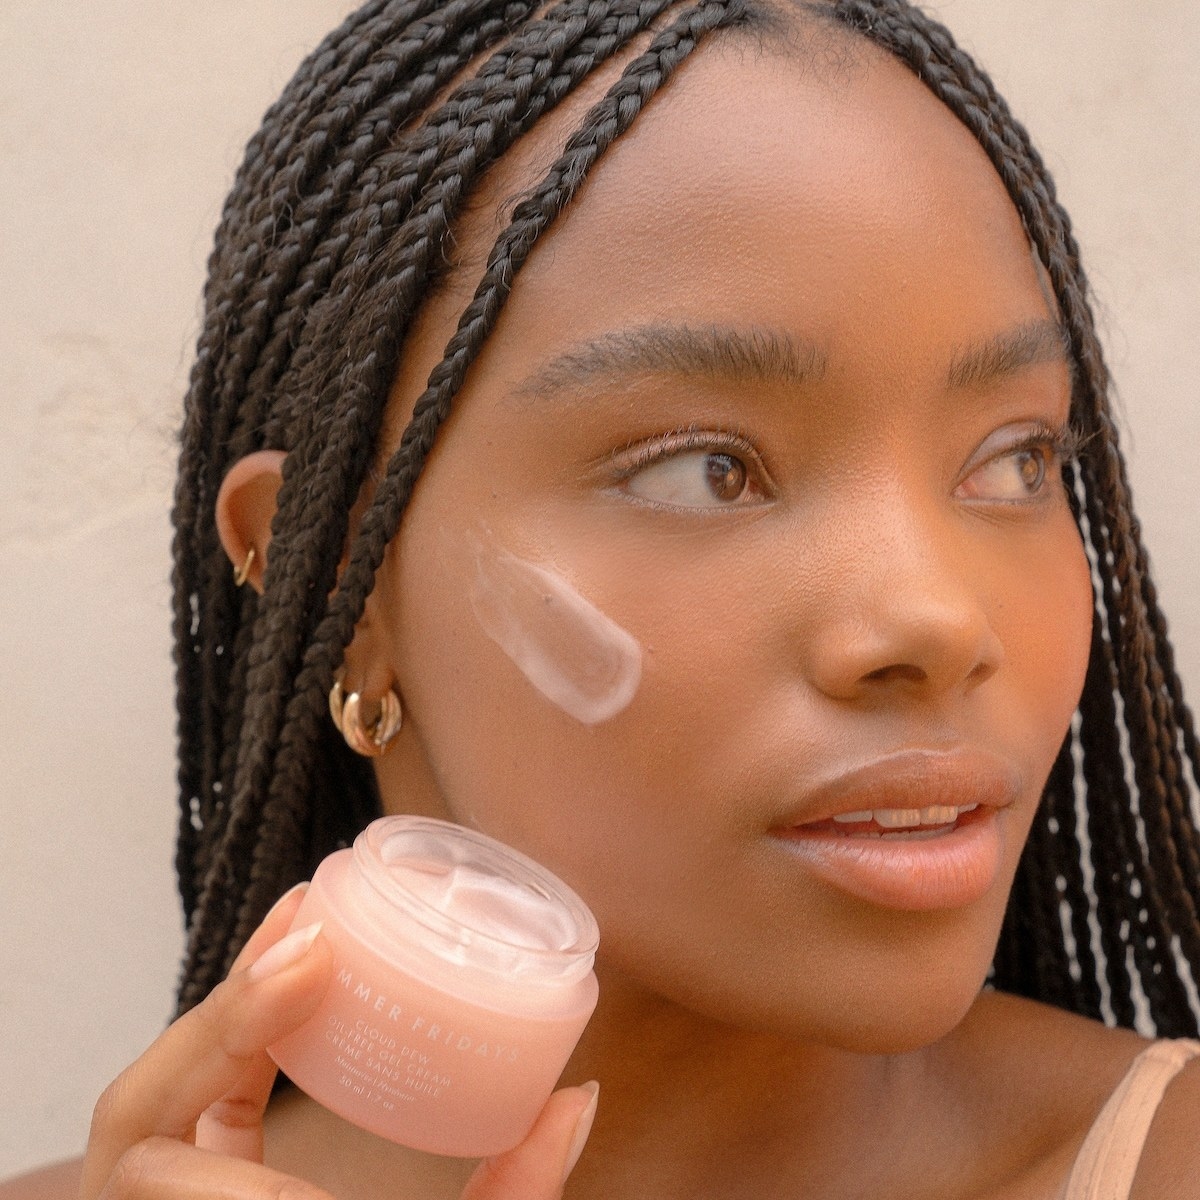 model holding the circular short container in light pink with a schmear of moisturizer on their face